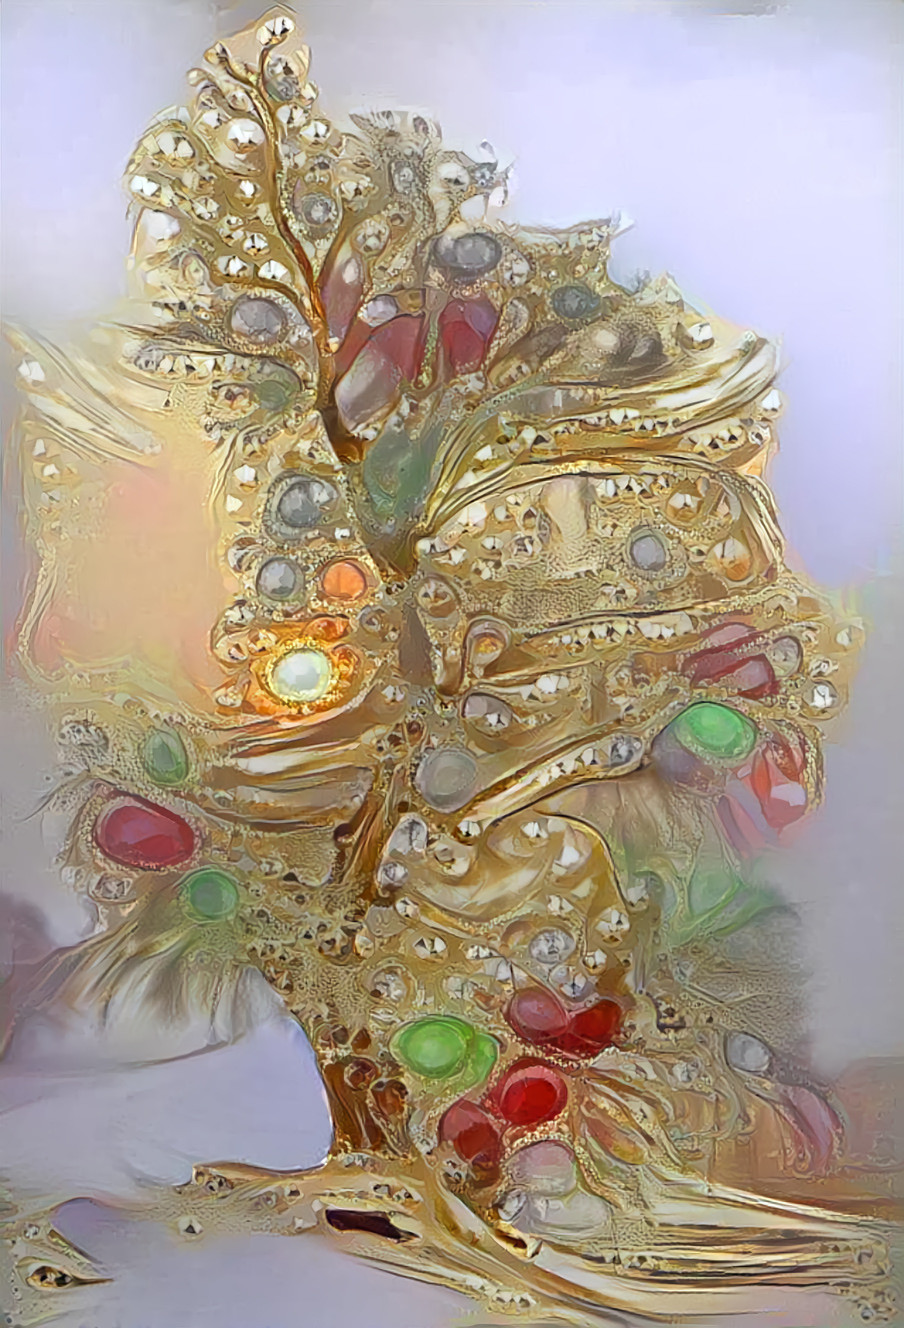 jeweled tree in winter, white, gold, red, green